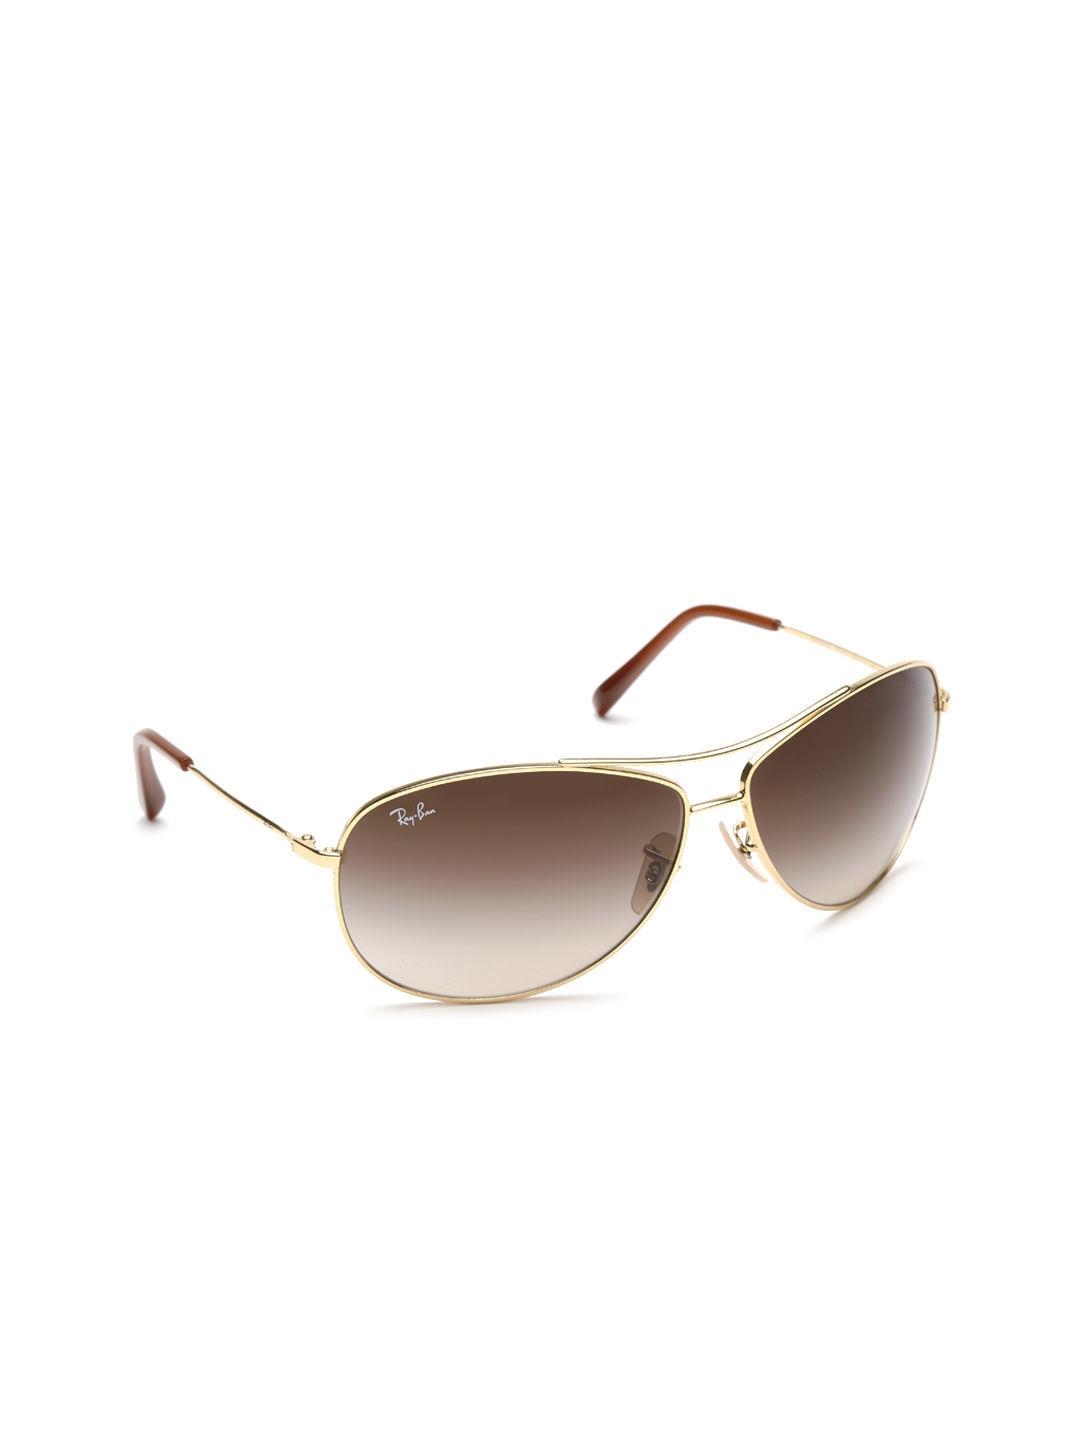 ray ban sunglasses online shopping lowest price